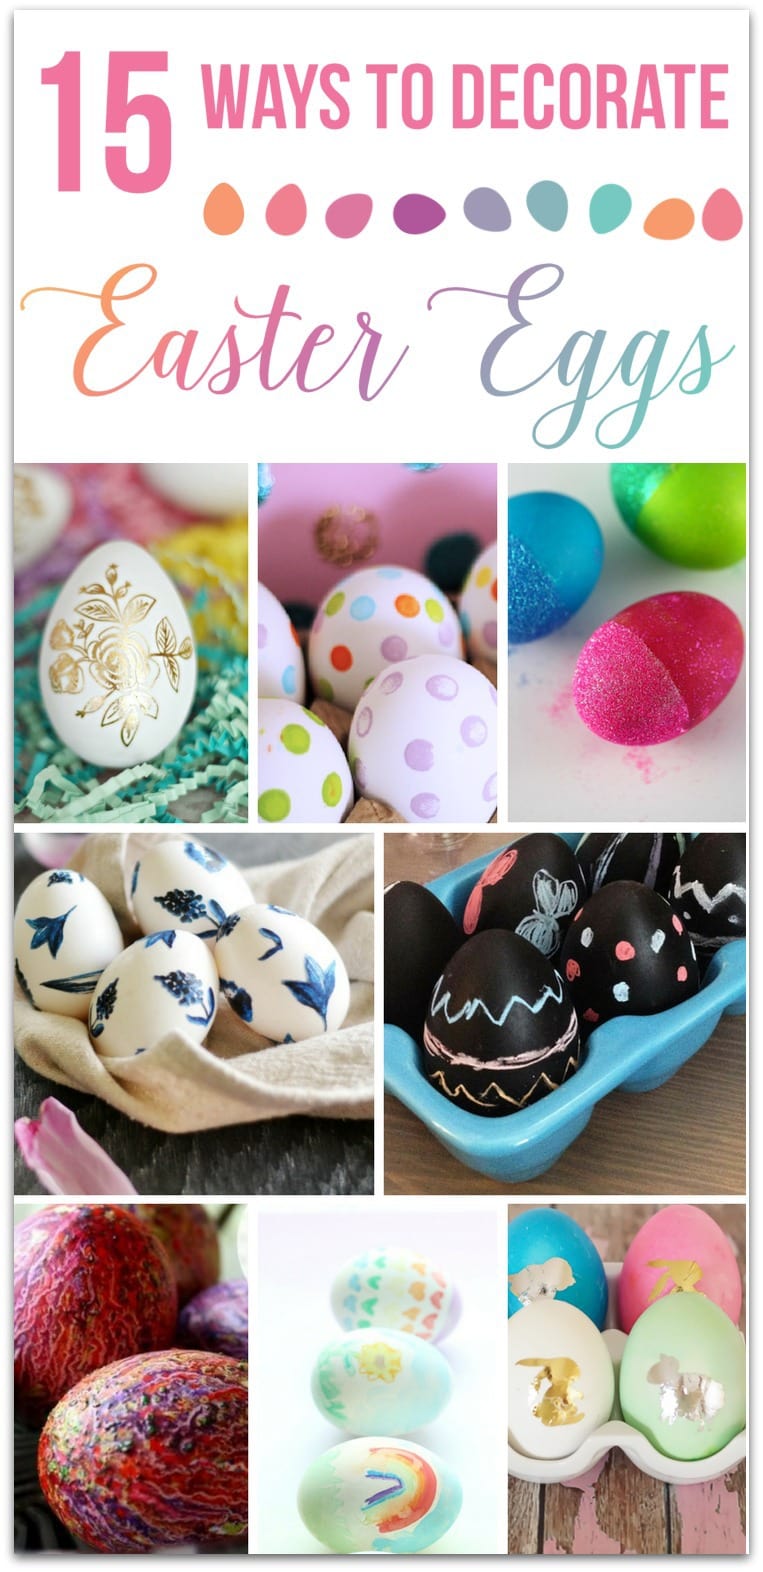 How many ways can you think of for Easter Egg decorating? I think no matter how old my kids are, they will always think about decorating eggs when Easter rolls around.